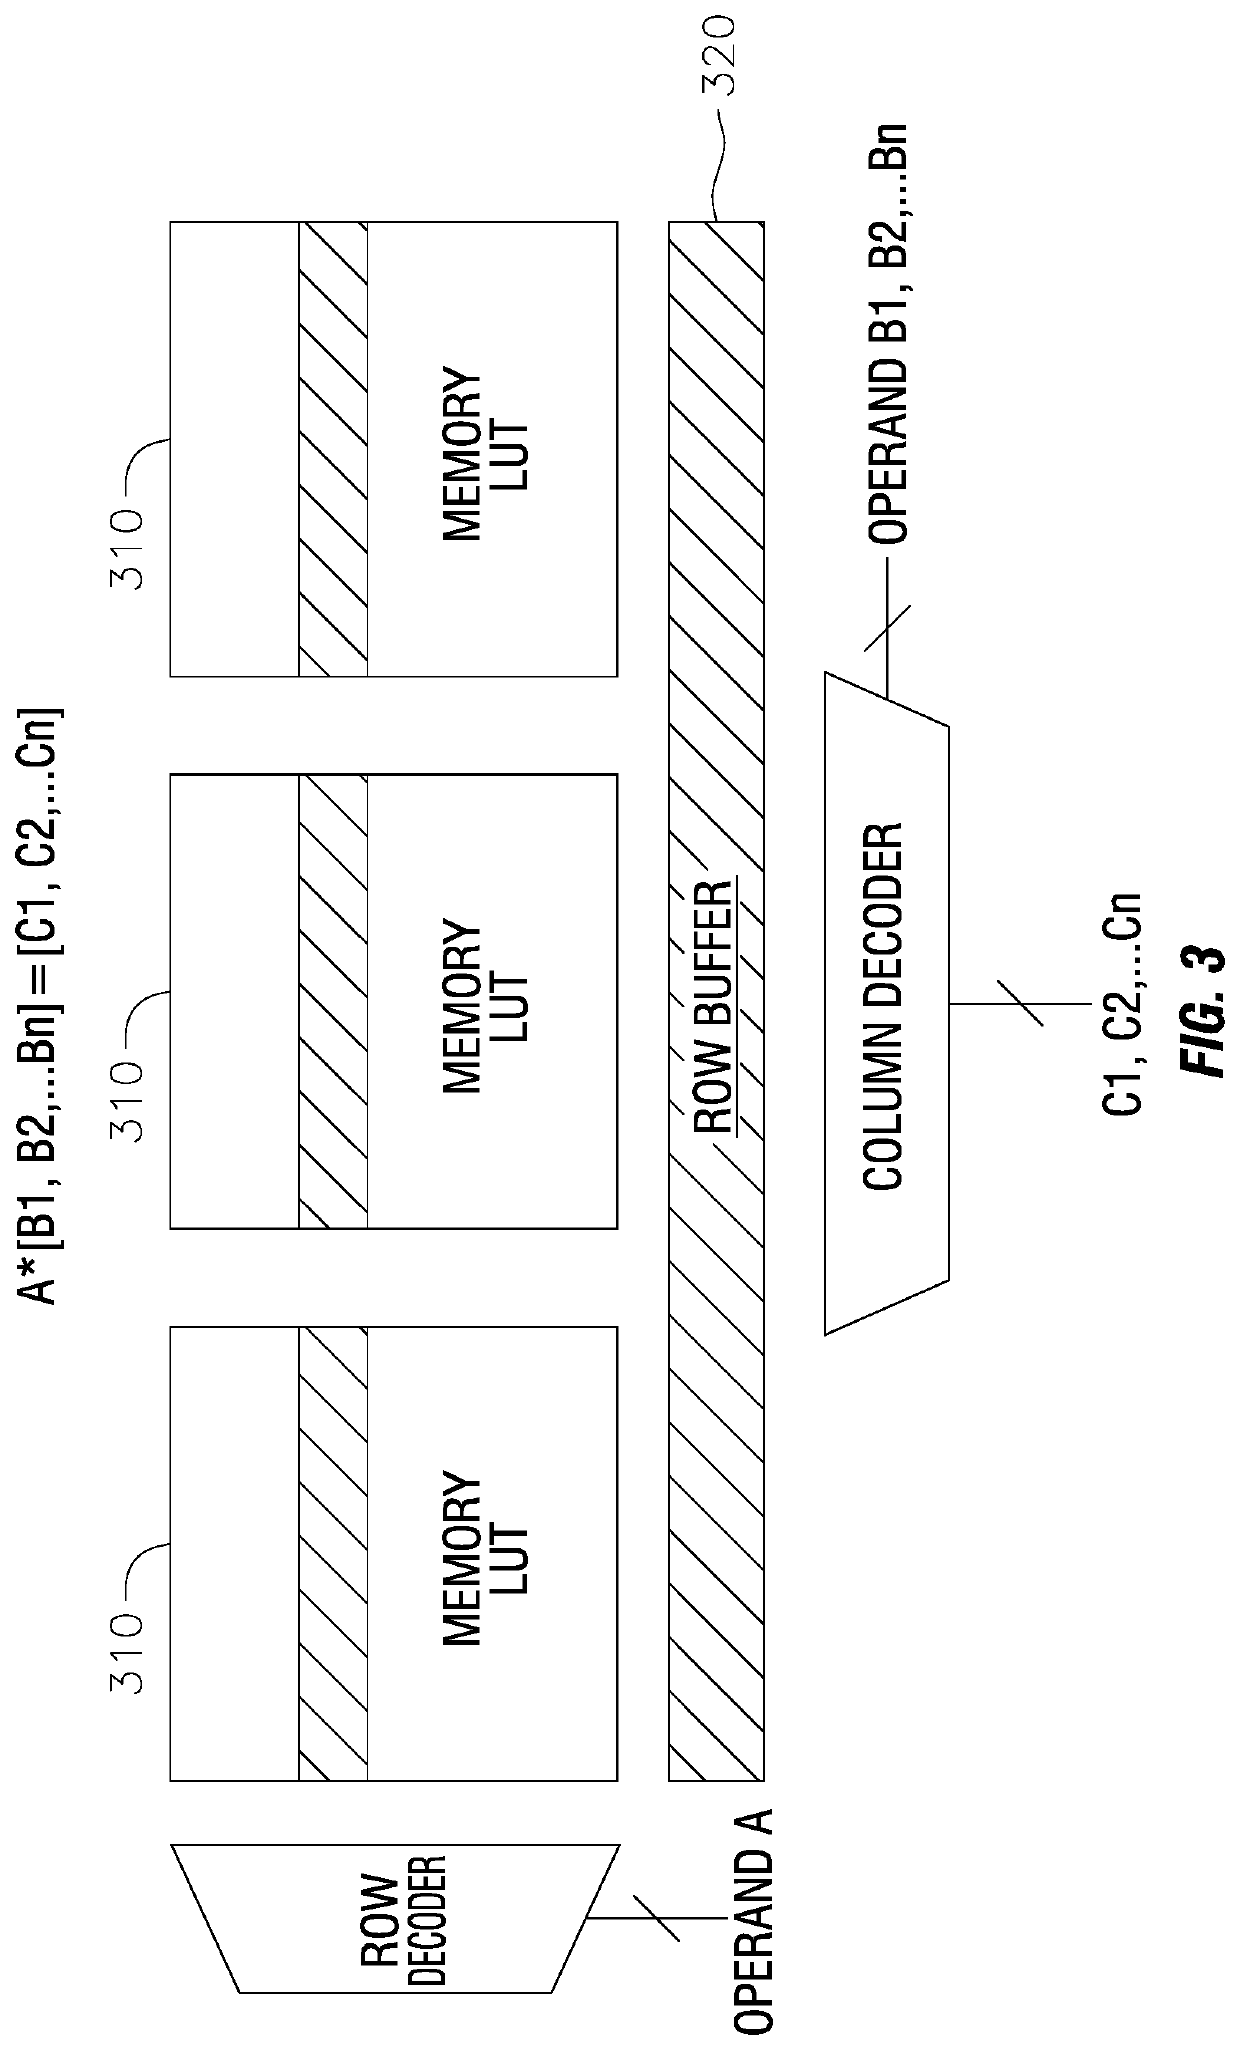 Computing mechanisms using lookup tables stored on memory